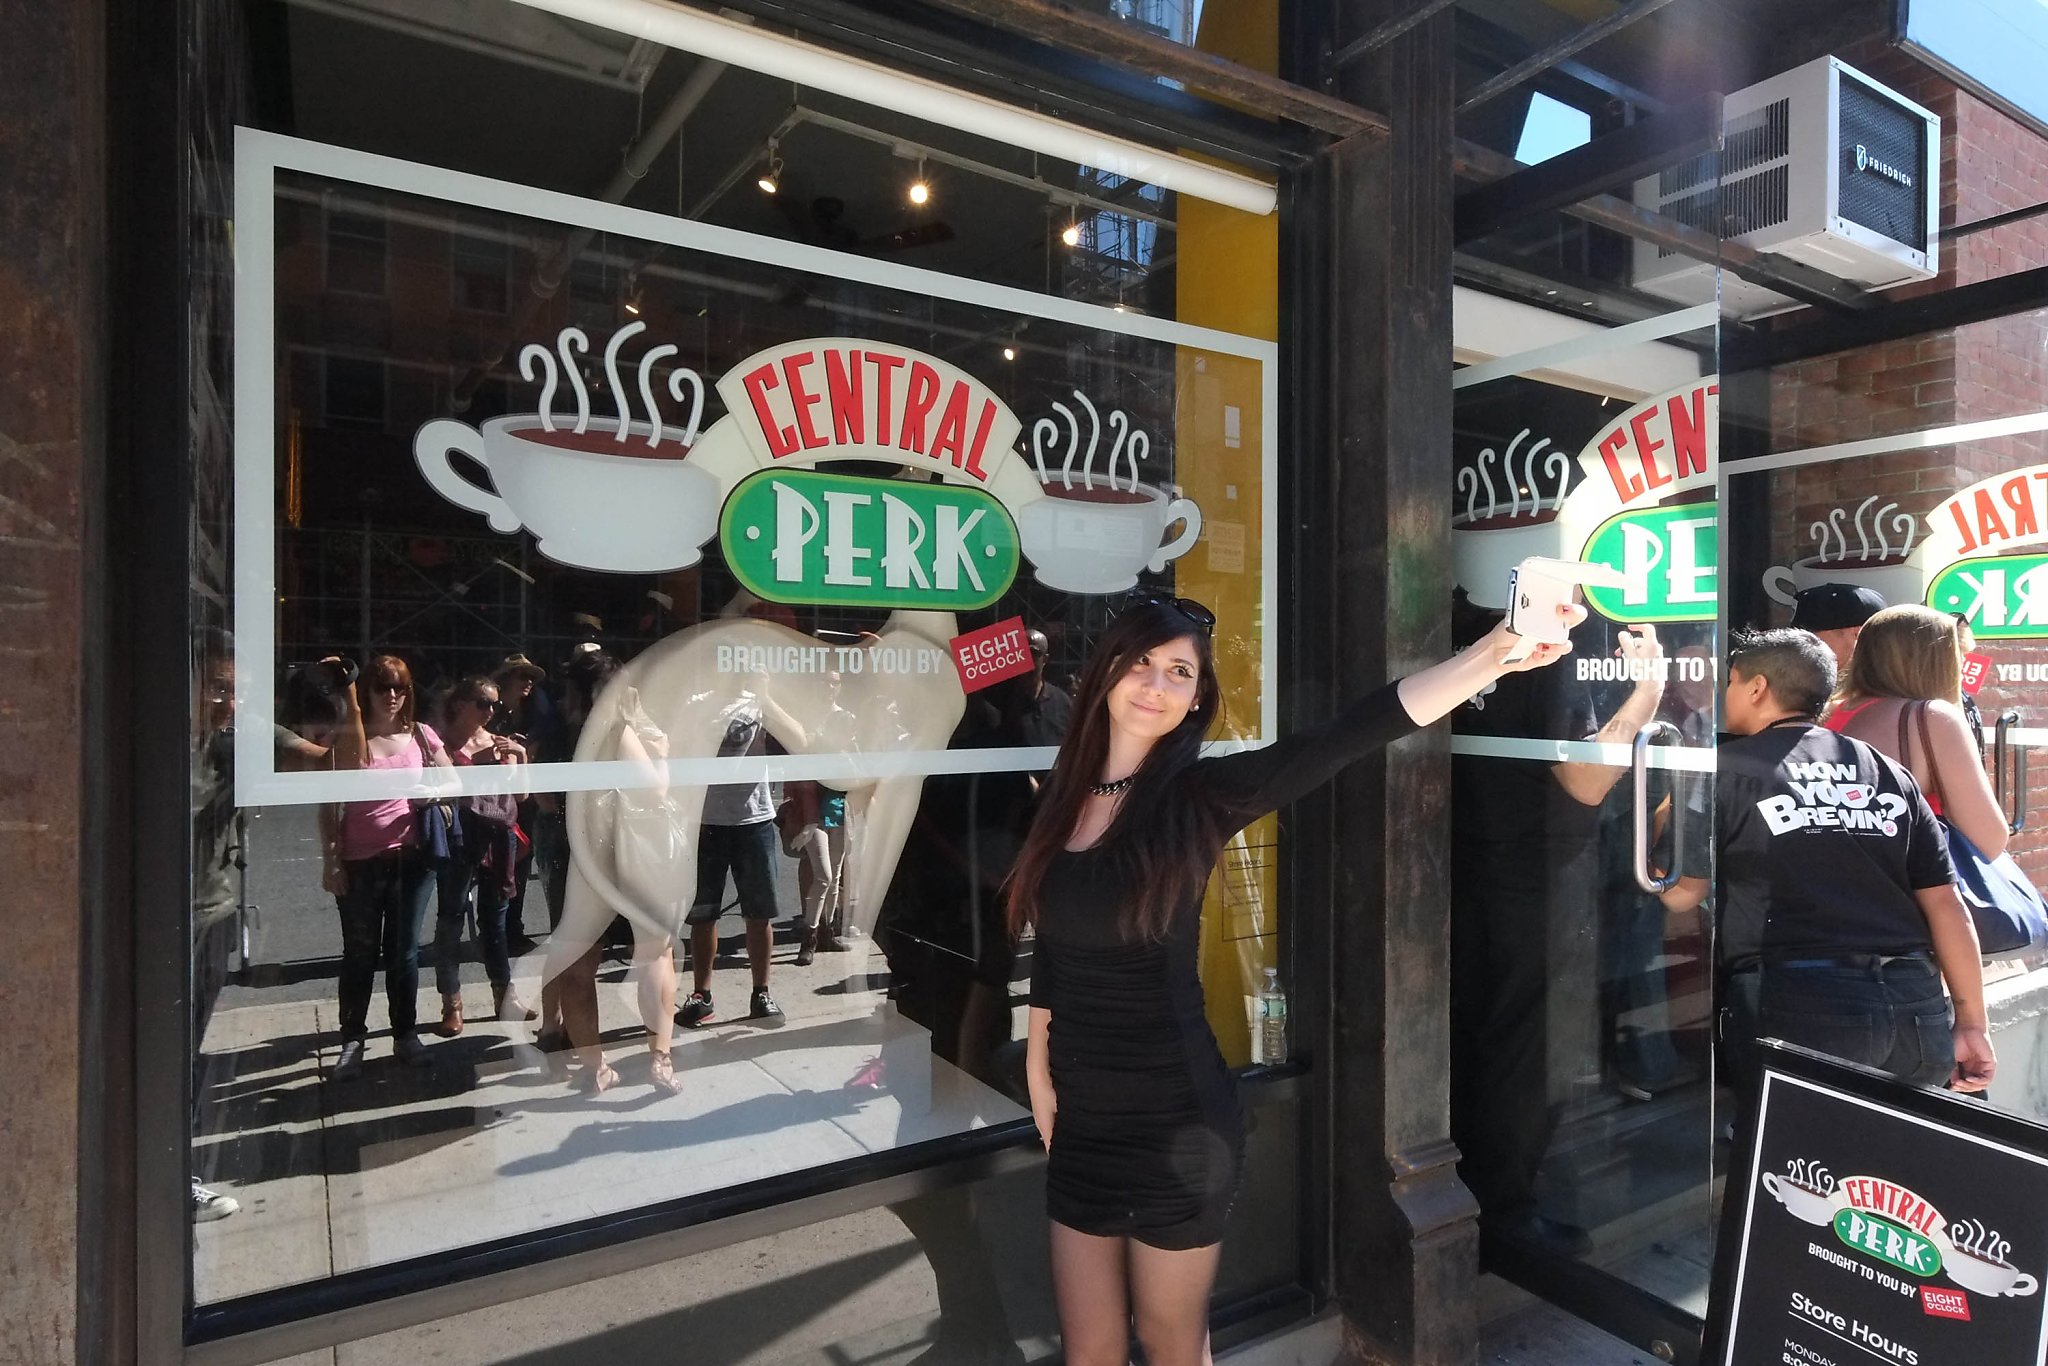 Rejoice, 'Friends' fans: Central Perk coffee shops may soon become